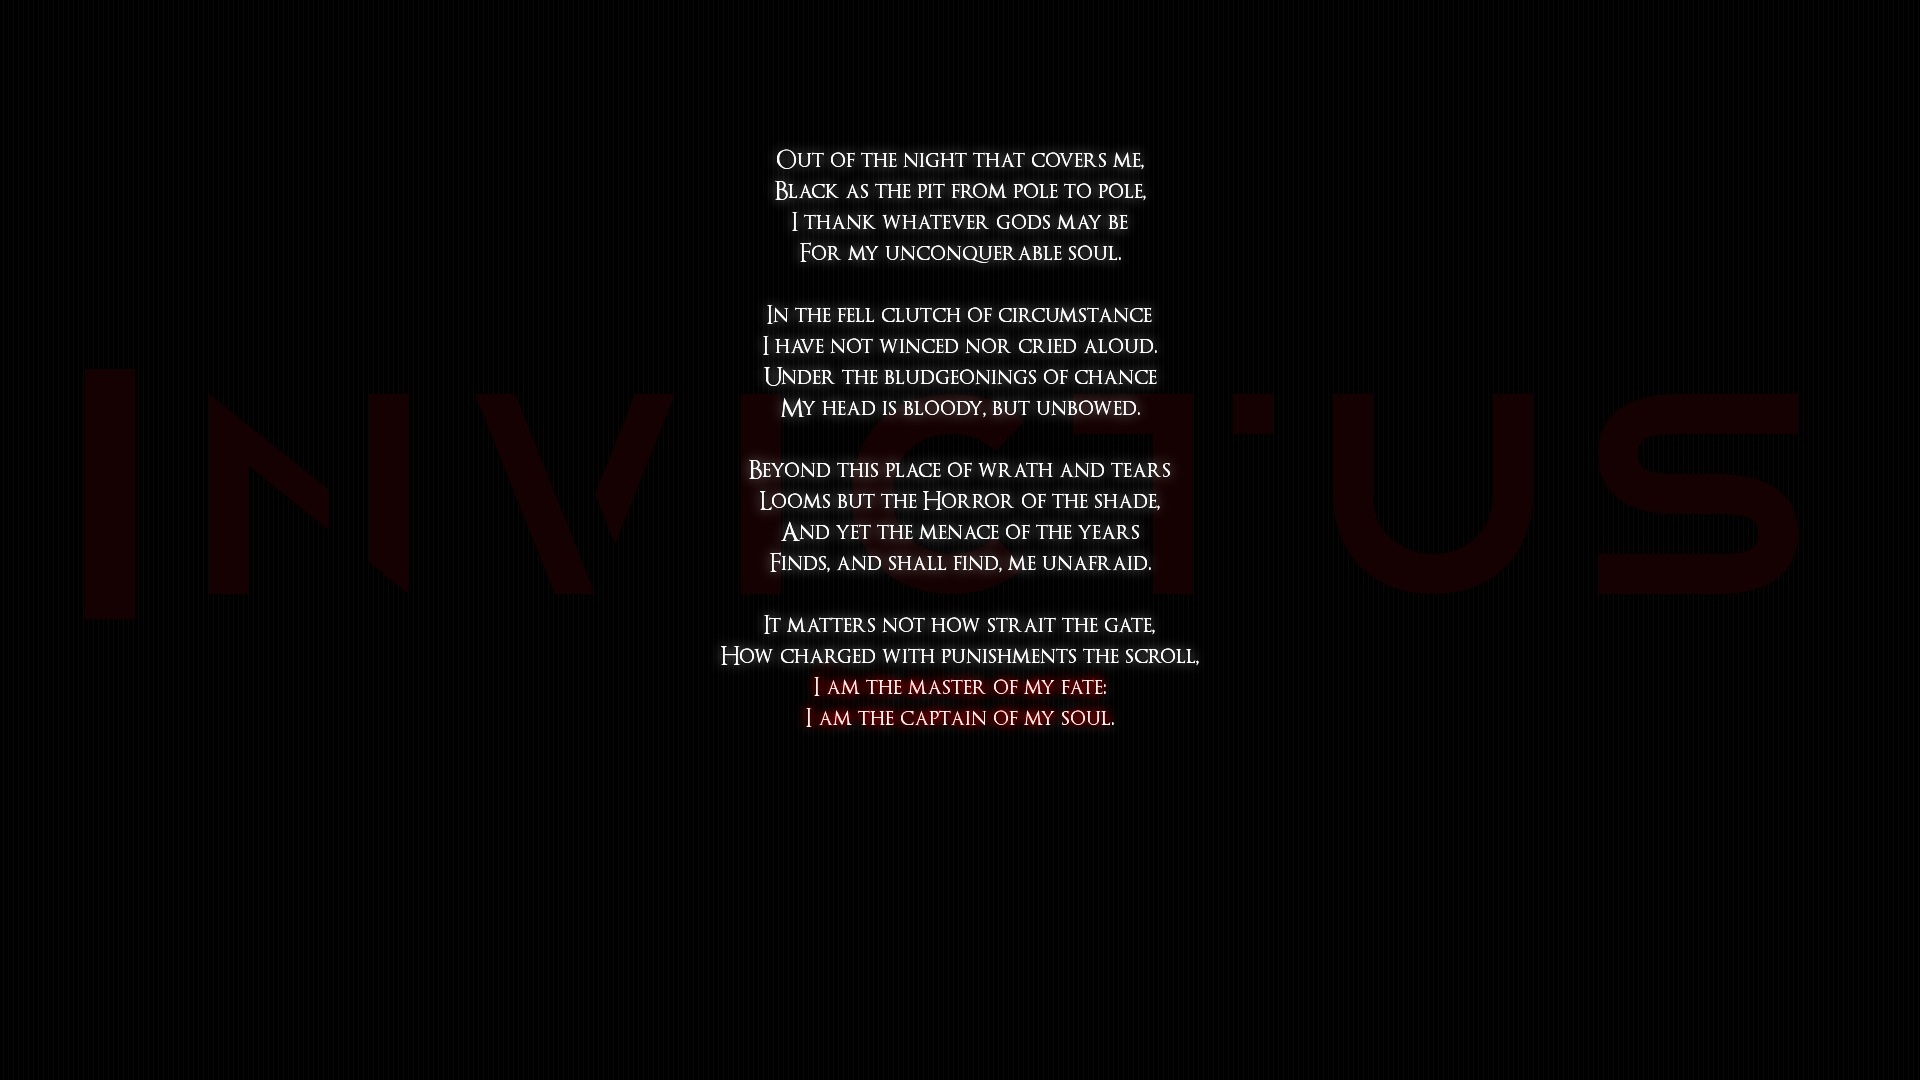 invictus, Black, Quotes, Poems, Statement, Text, Words Wallpapers HD /  Desktop and Mobile Backgrounds